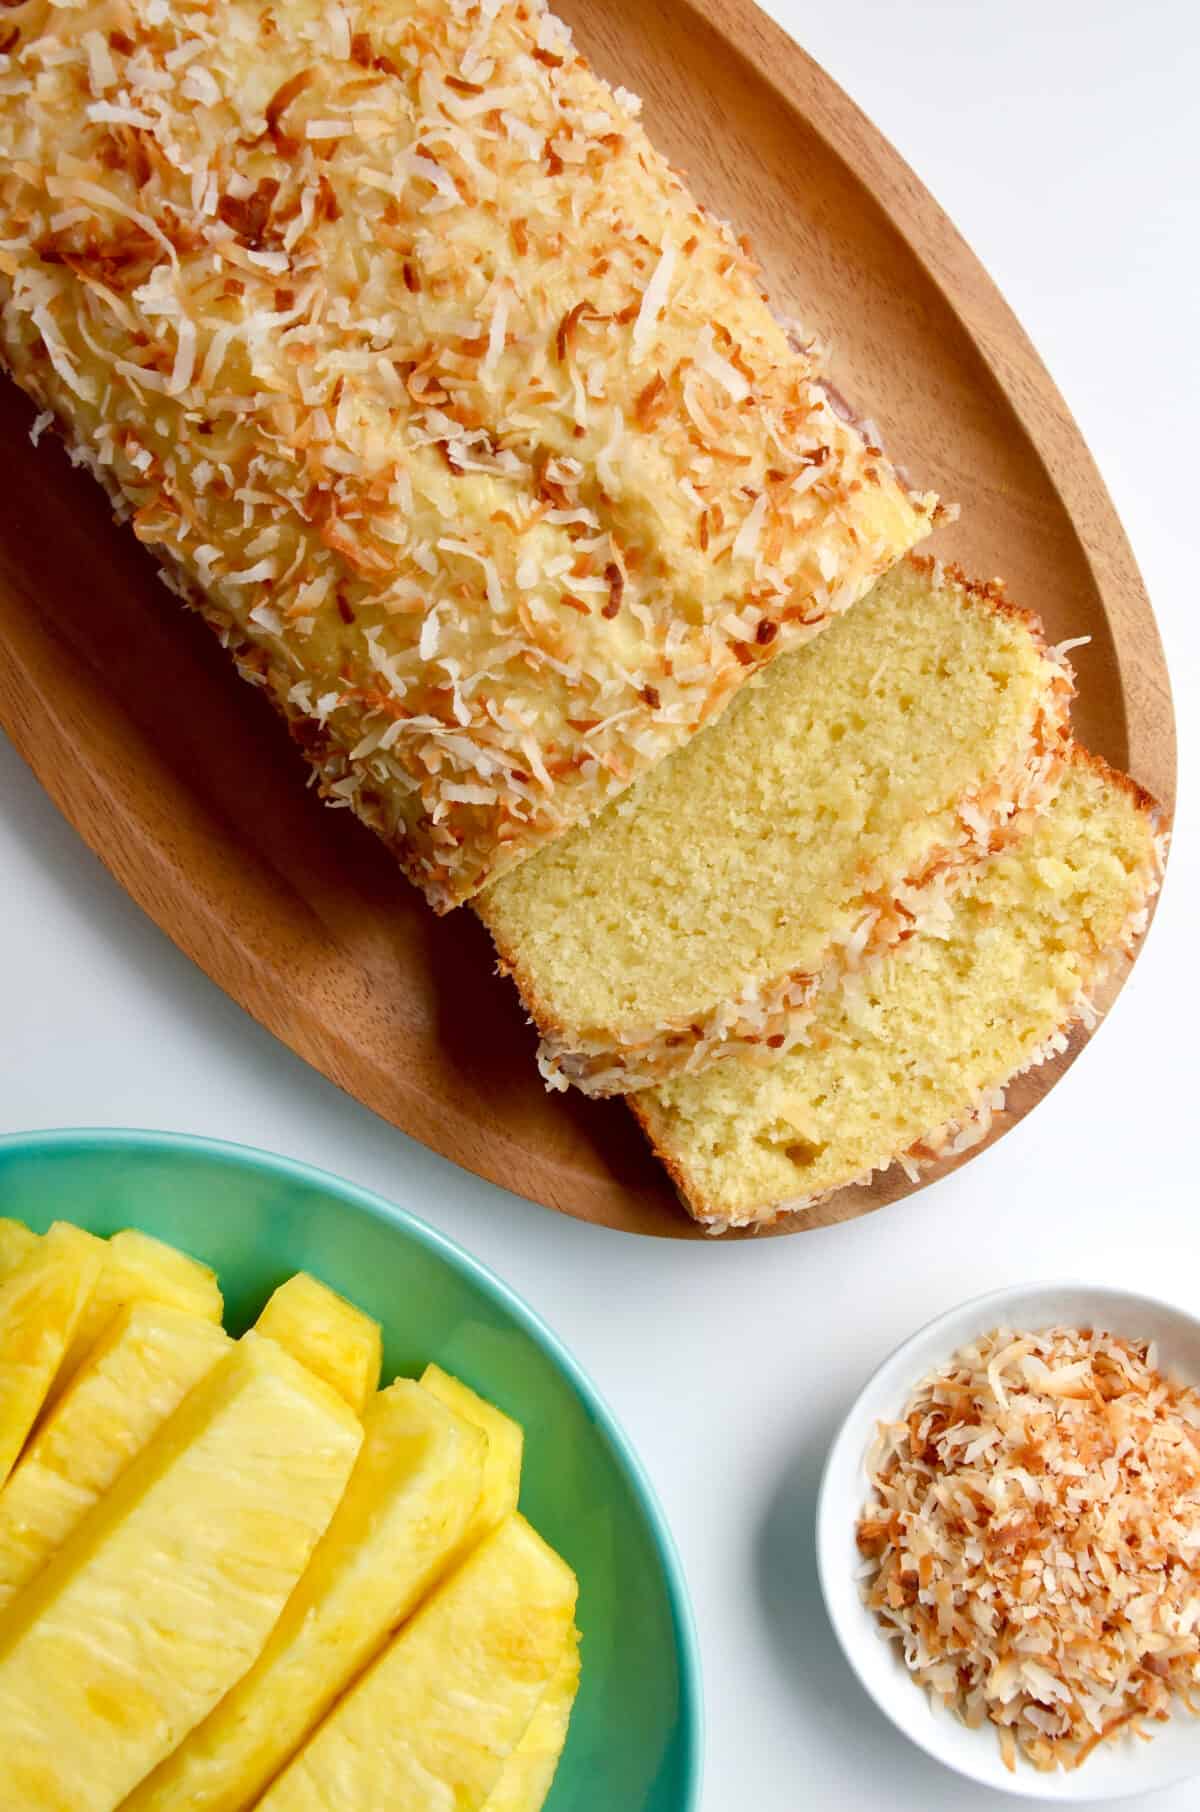 Glazed pineapple coconut bread next to a plate with slices of pineapple.